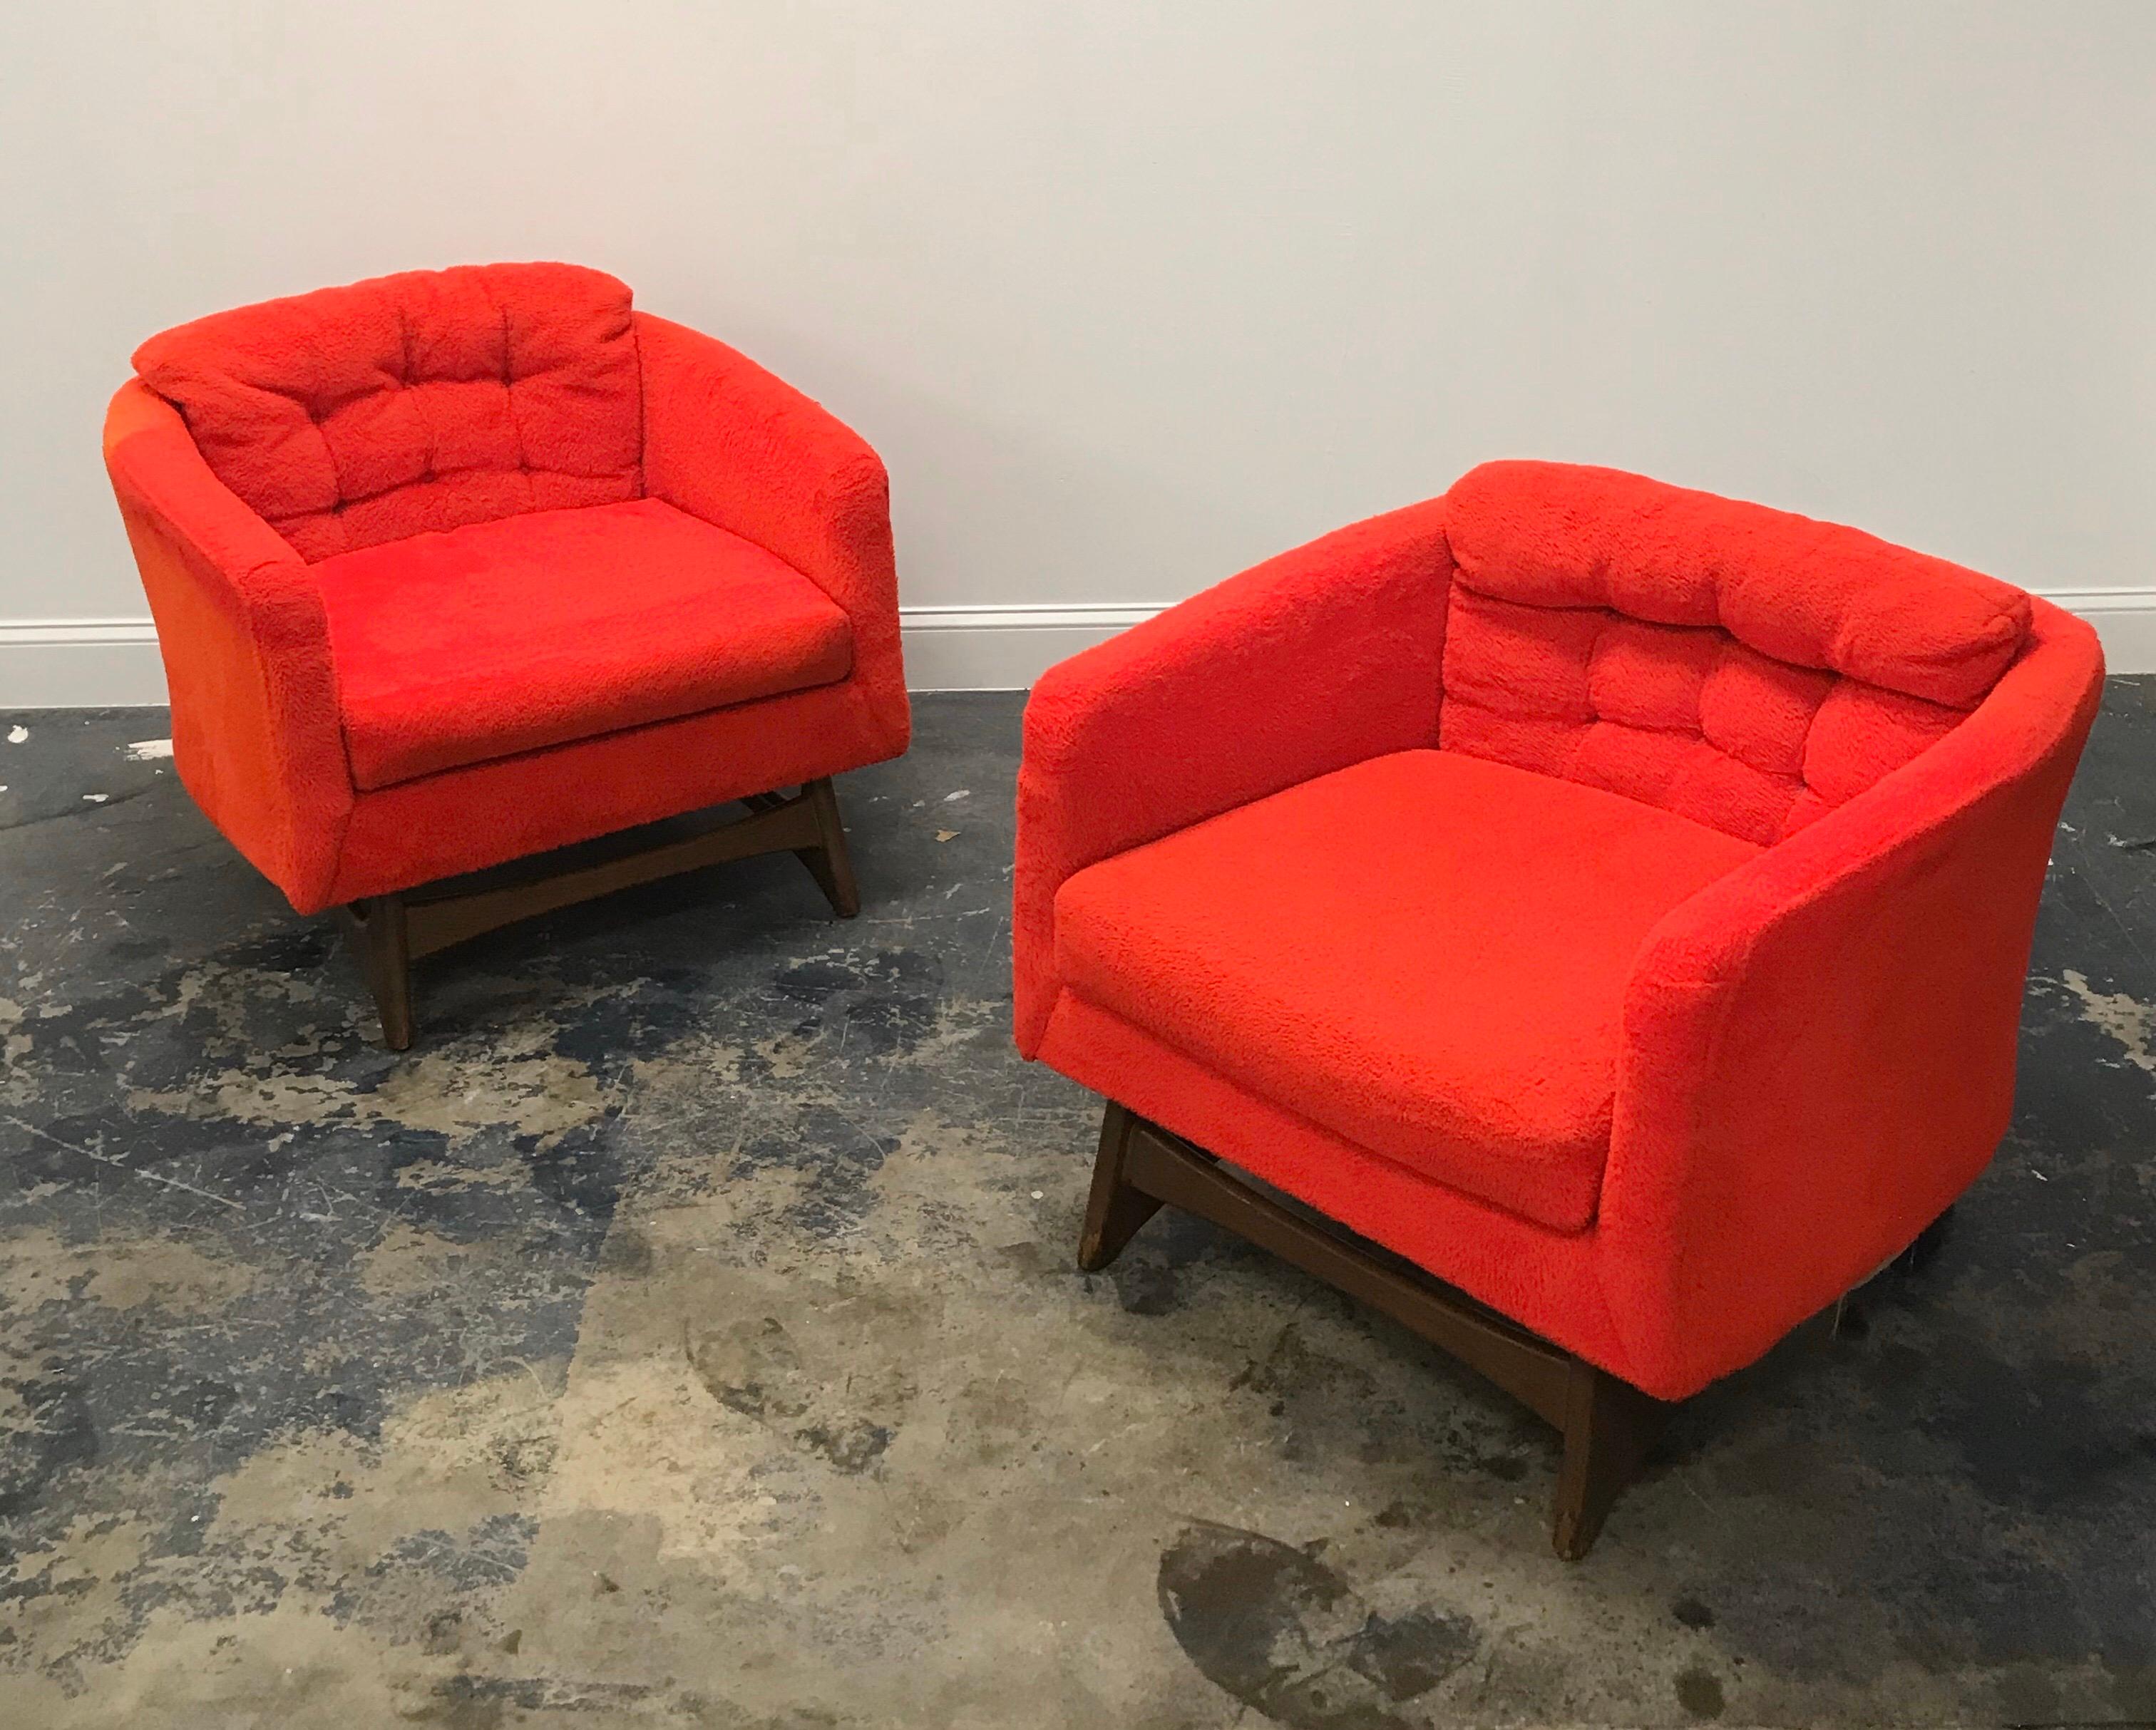 Striking pair of lounge or club chairs reminiscent of Adrian Pearsall’s designs. Chairs feature a sculptural wood base over a deep curved back. Original upholstery in very good condition. Wear to bases.

Measures: 28